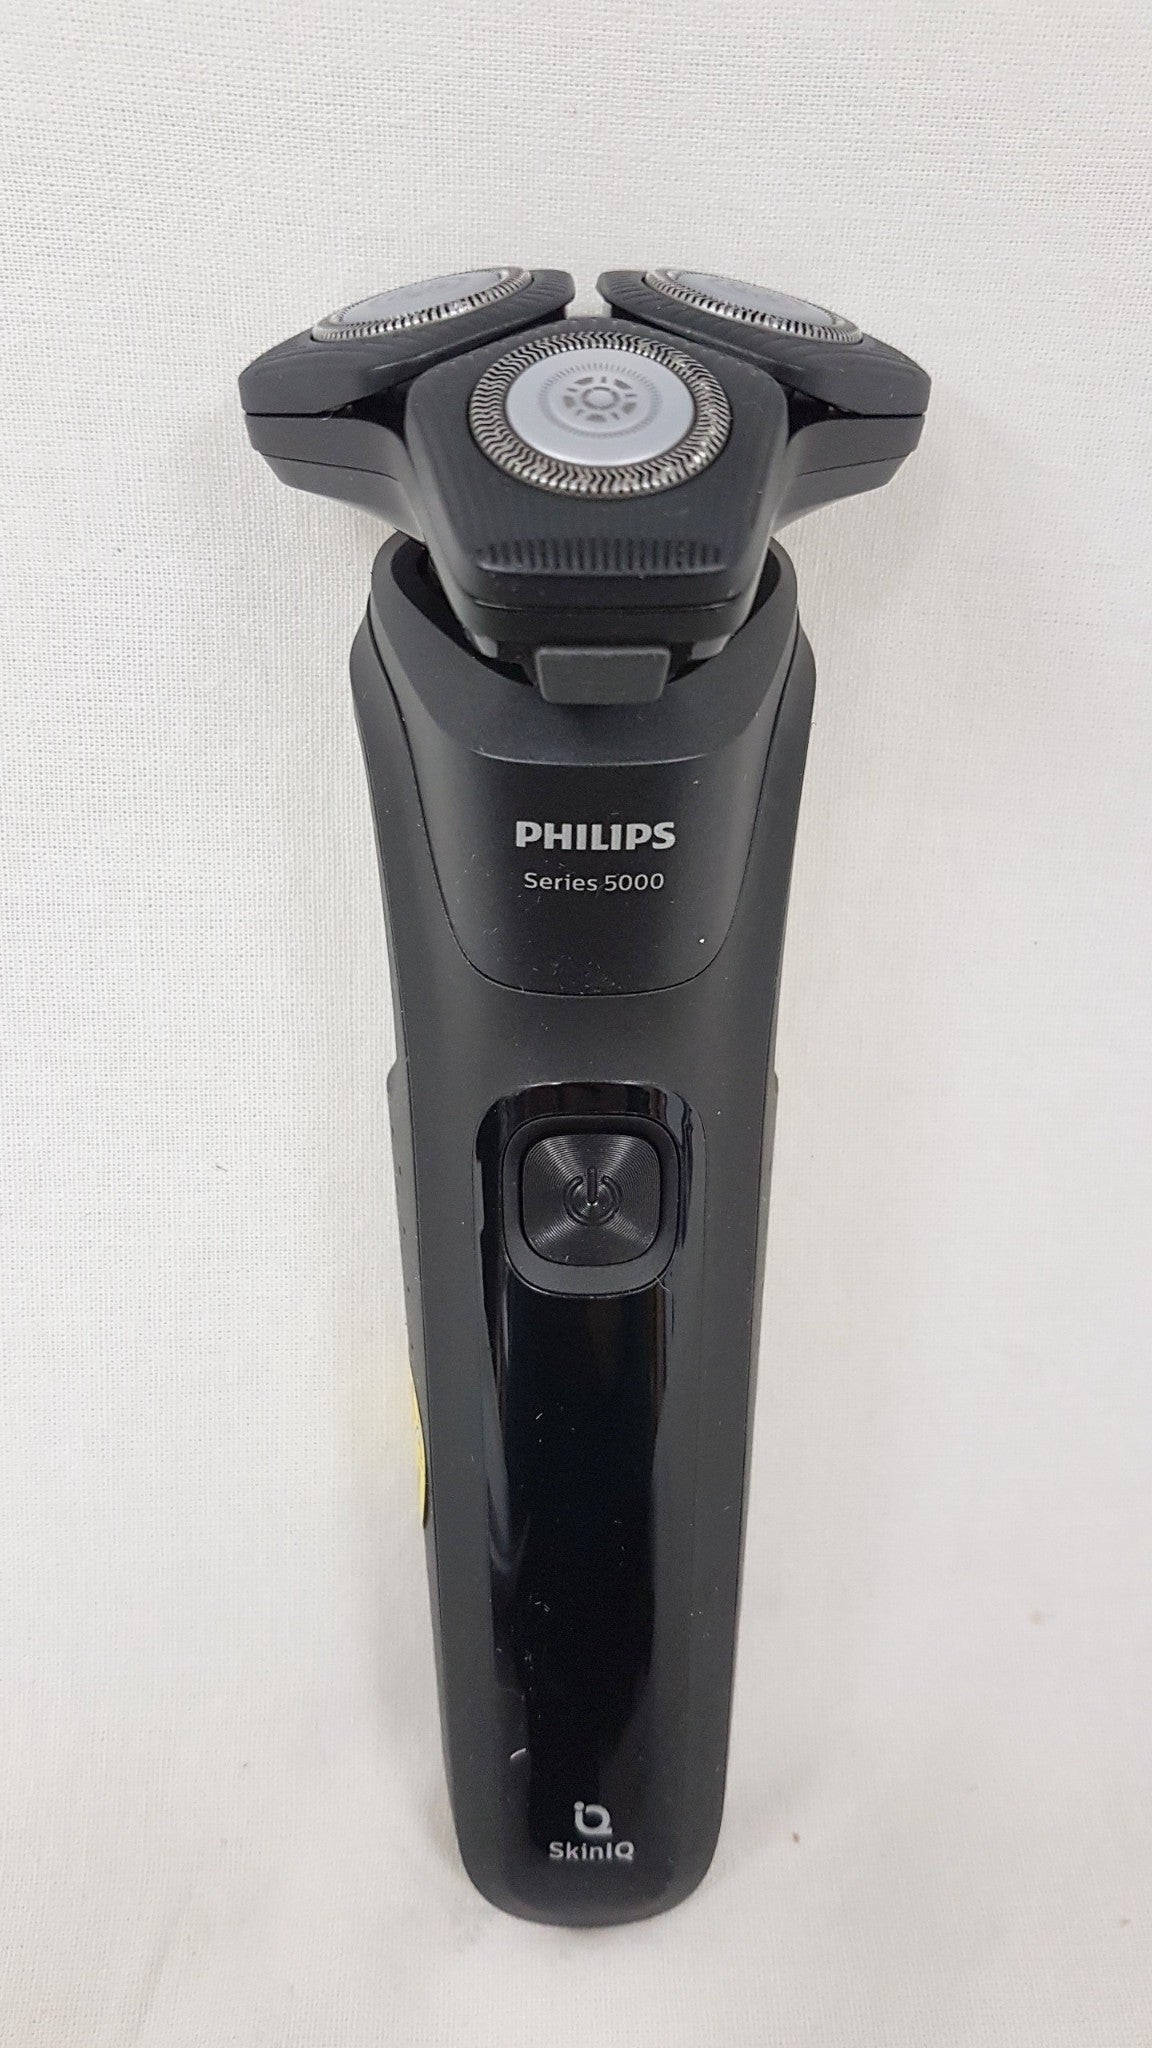 PHILIPS 5000 Series Wet & Dry Electric Shaver, S5588/25 NEW